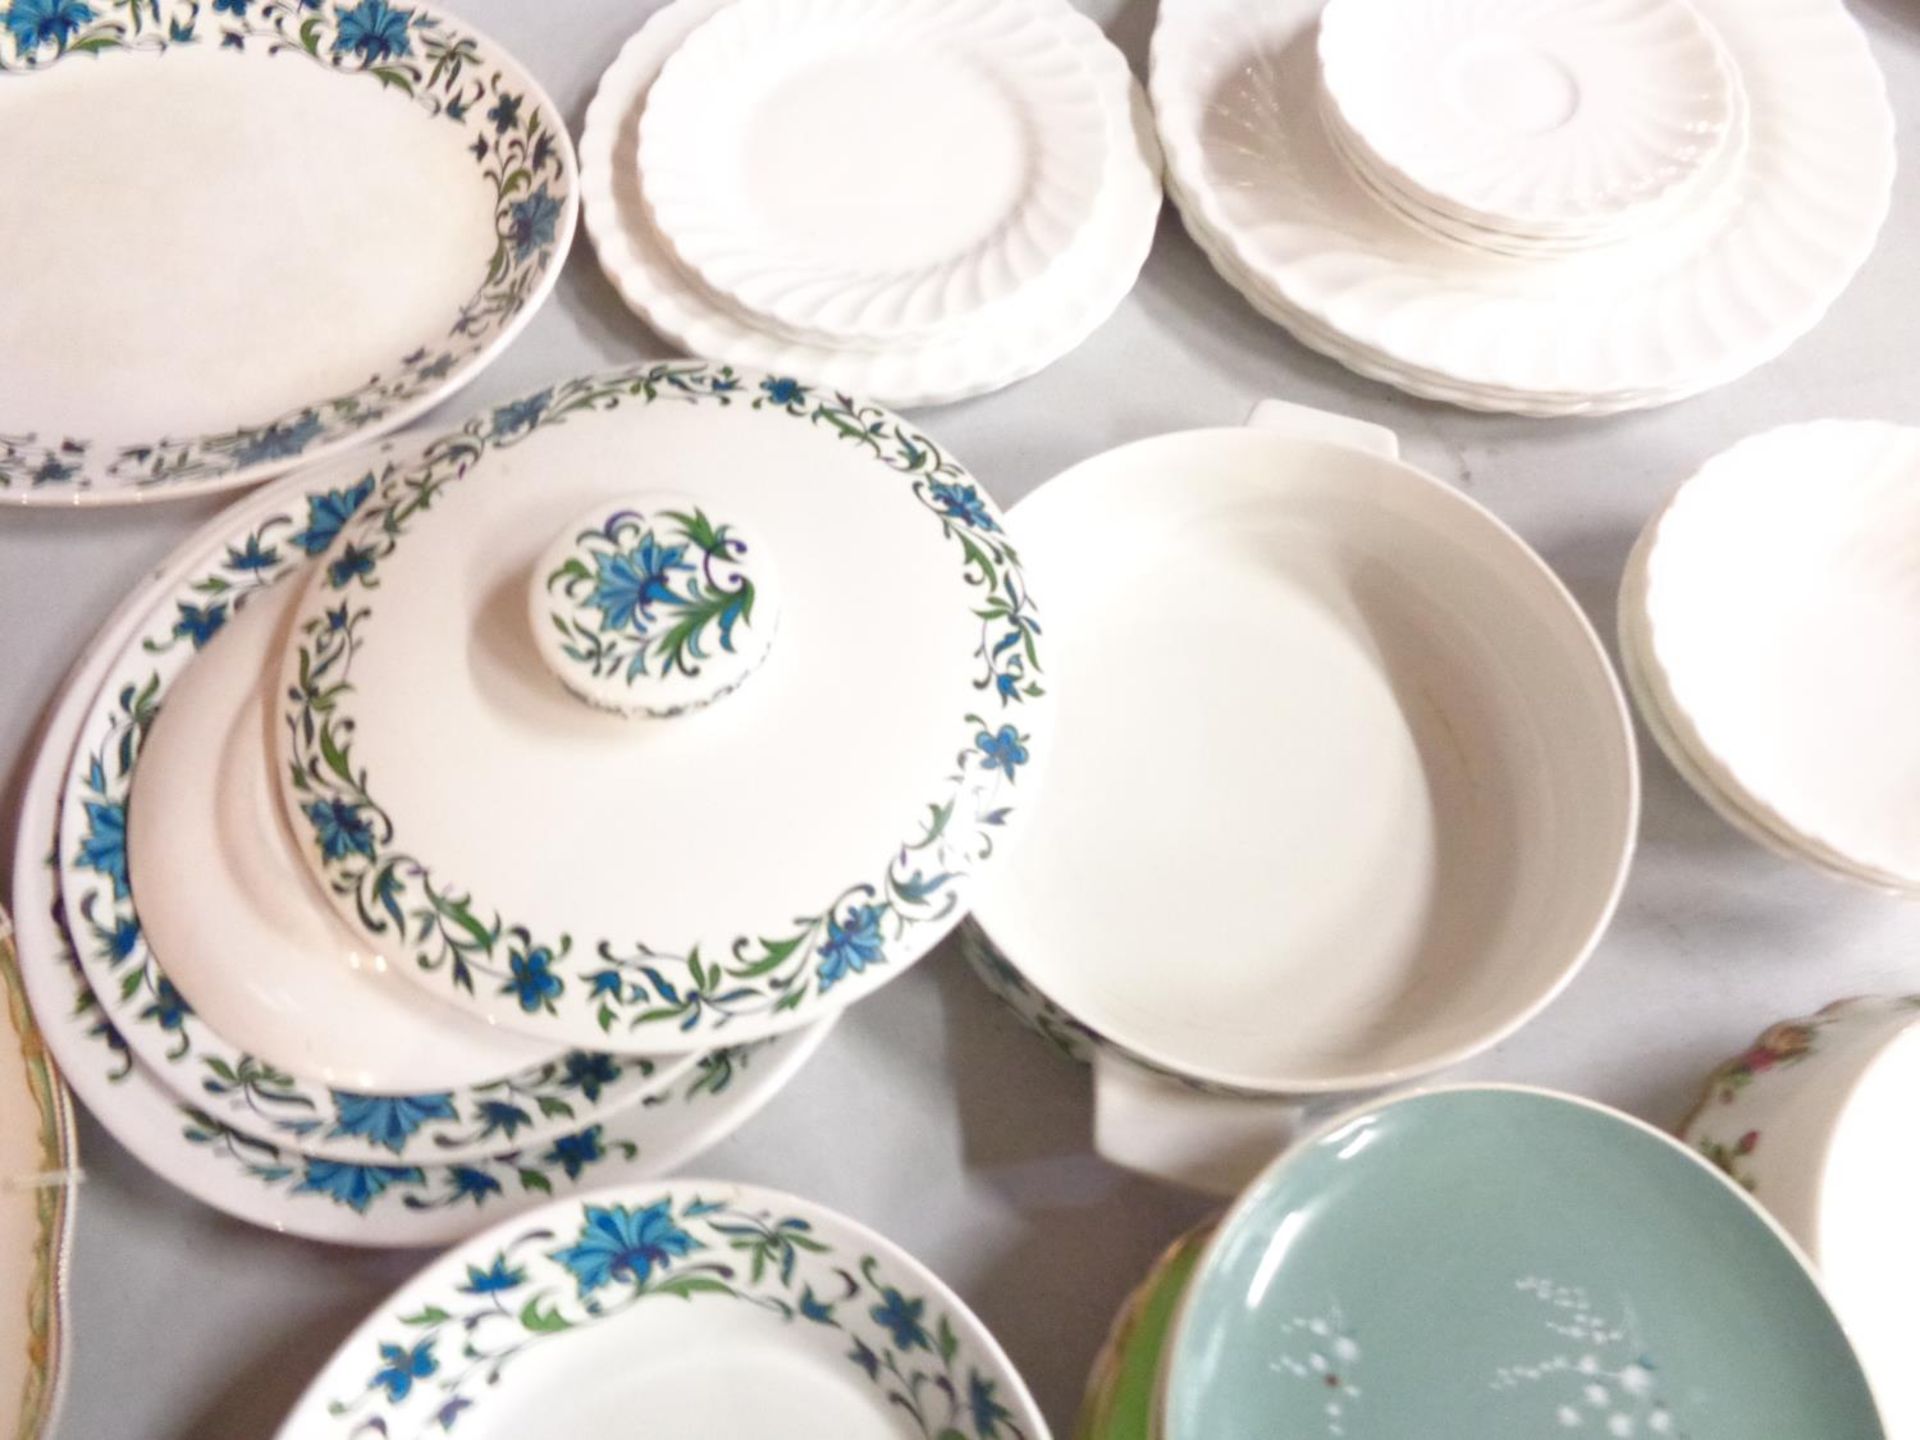 A SELECTION OF DINNERWARE TO INCLUDE A SERVING PLATTER, LIDDED DISH, PLATES, BOWLS AND SIDE PLATES - Image 4 of 4